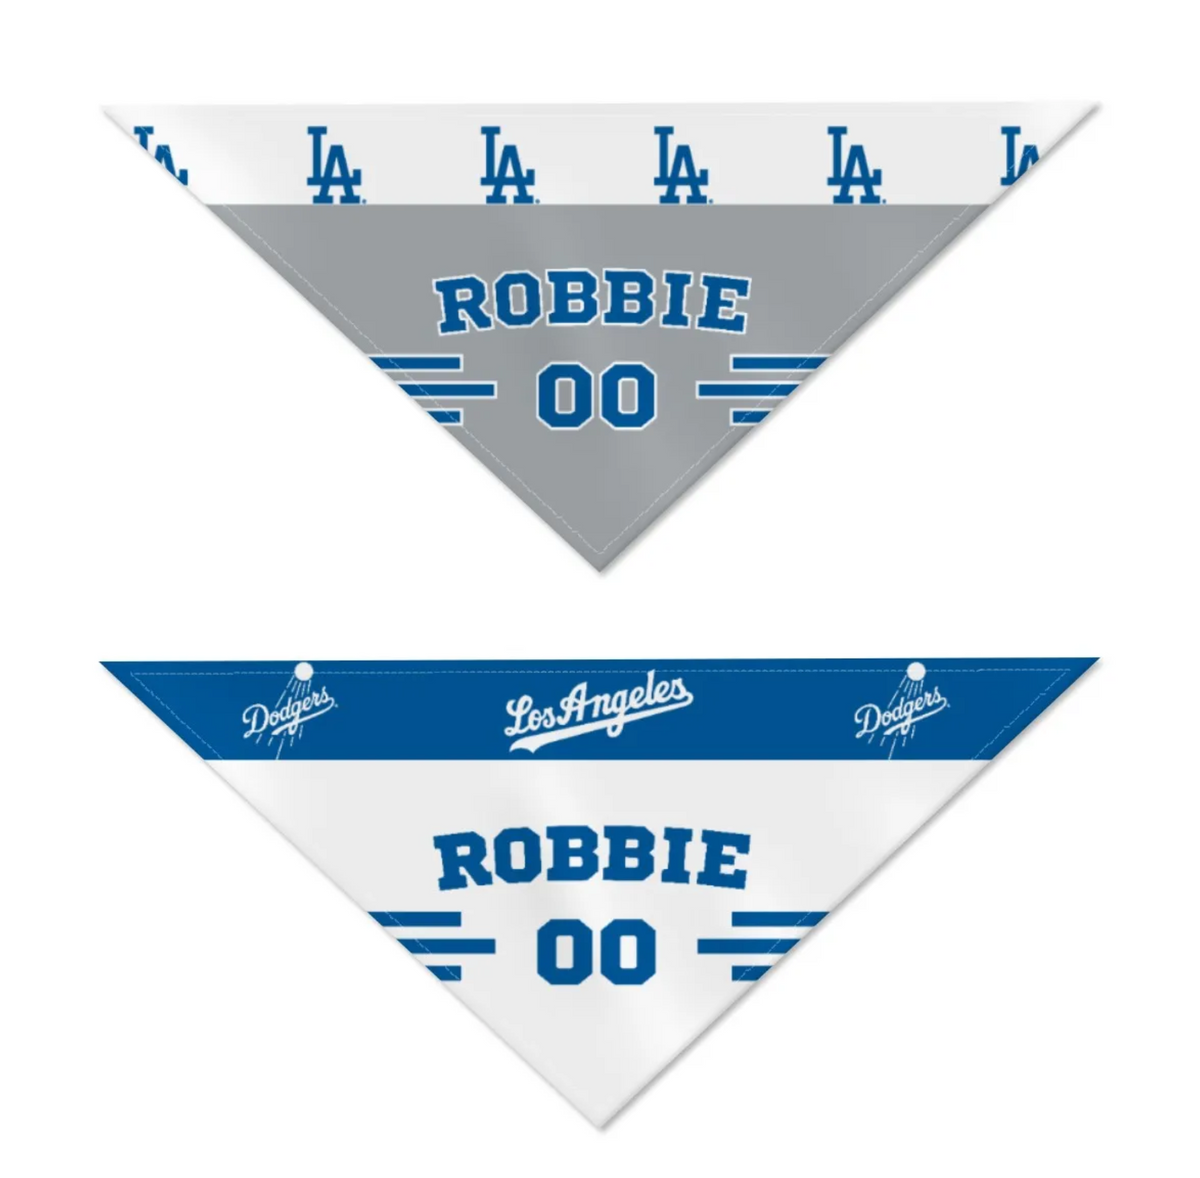 LA Dodgers Home/Road Personalized Reversible Bandana - 3 Red Rovers